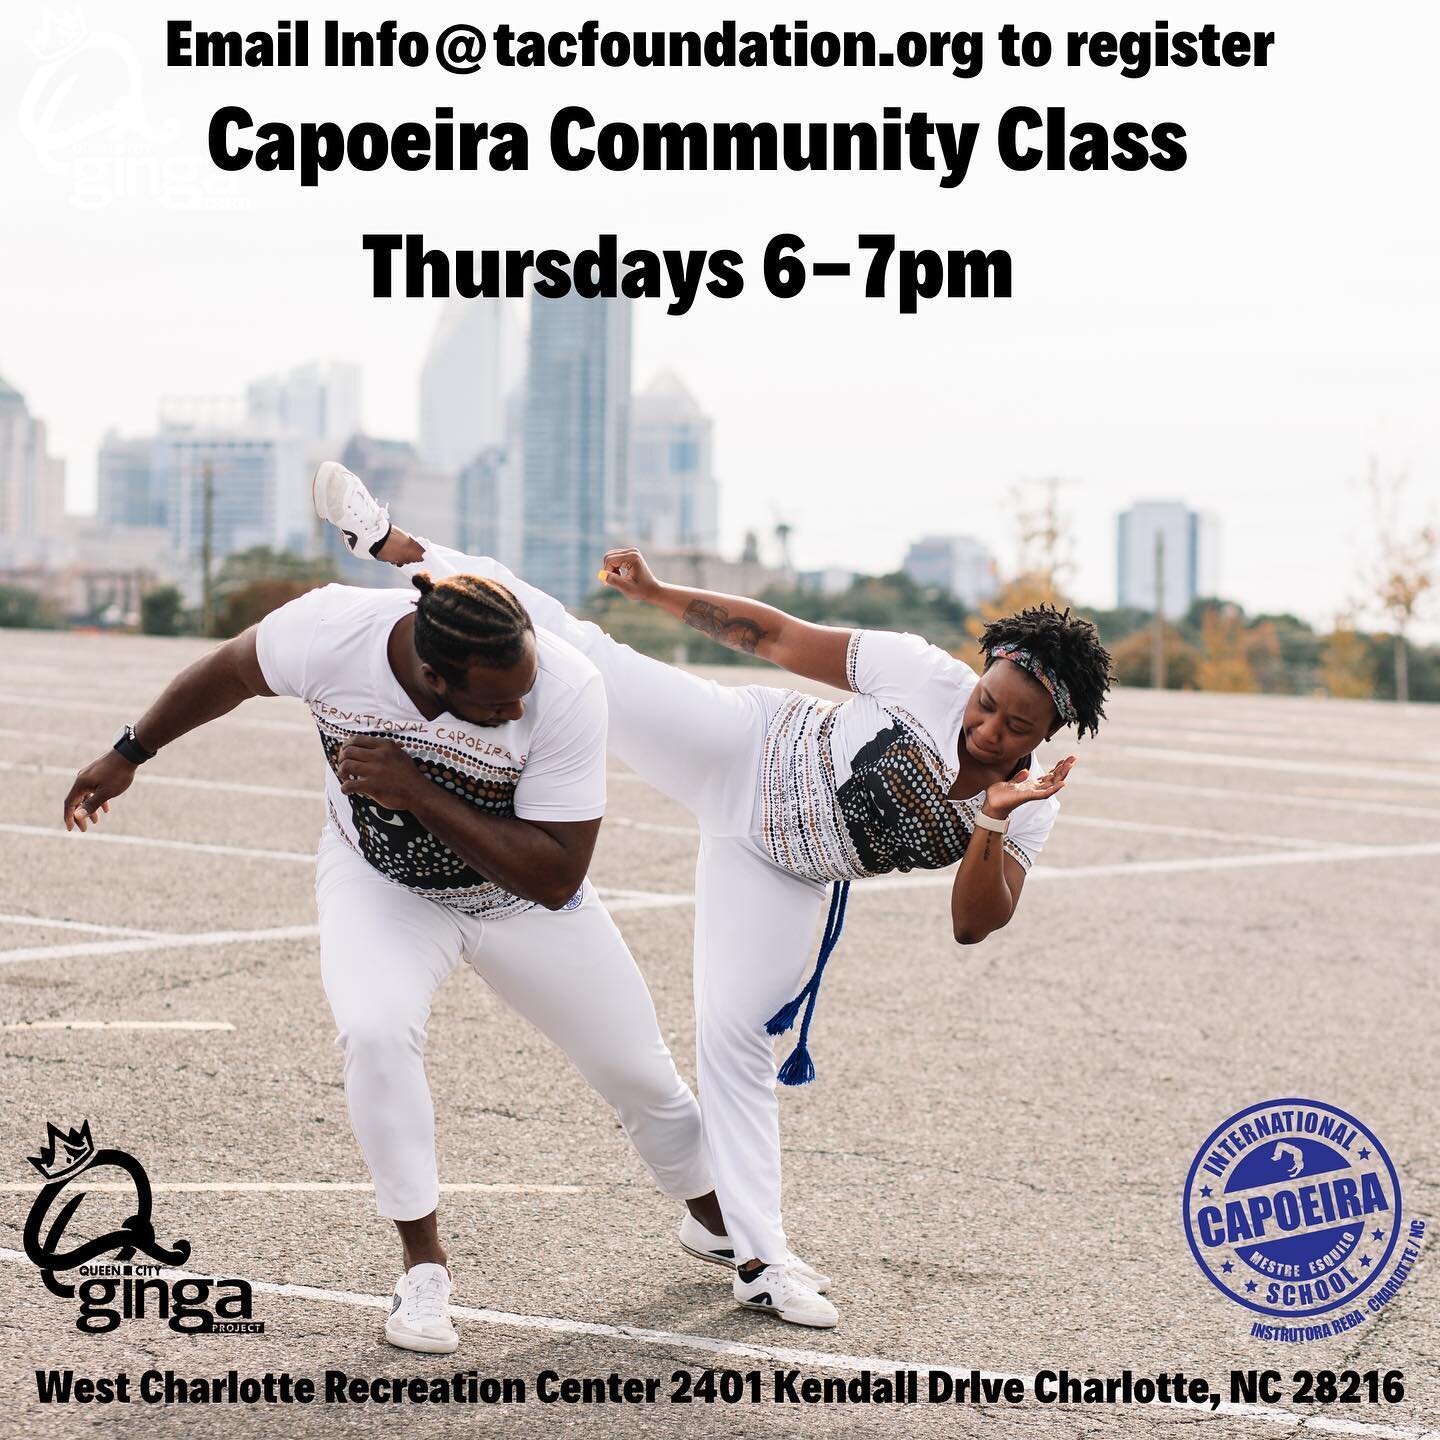 QC GINGA Project presents Capoeira Community Classes starting Thursday, December 1st. These FREE classes are open to all ages. Check our LinkTree to register. #capoeira #community #capoeiracommunity #qcgingaproject #ginga #qccapoeira #charlottecapoei